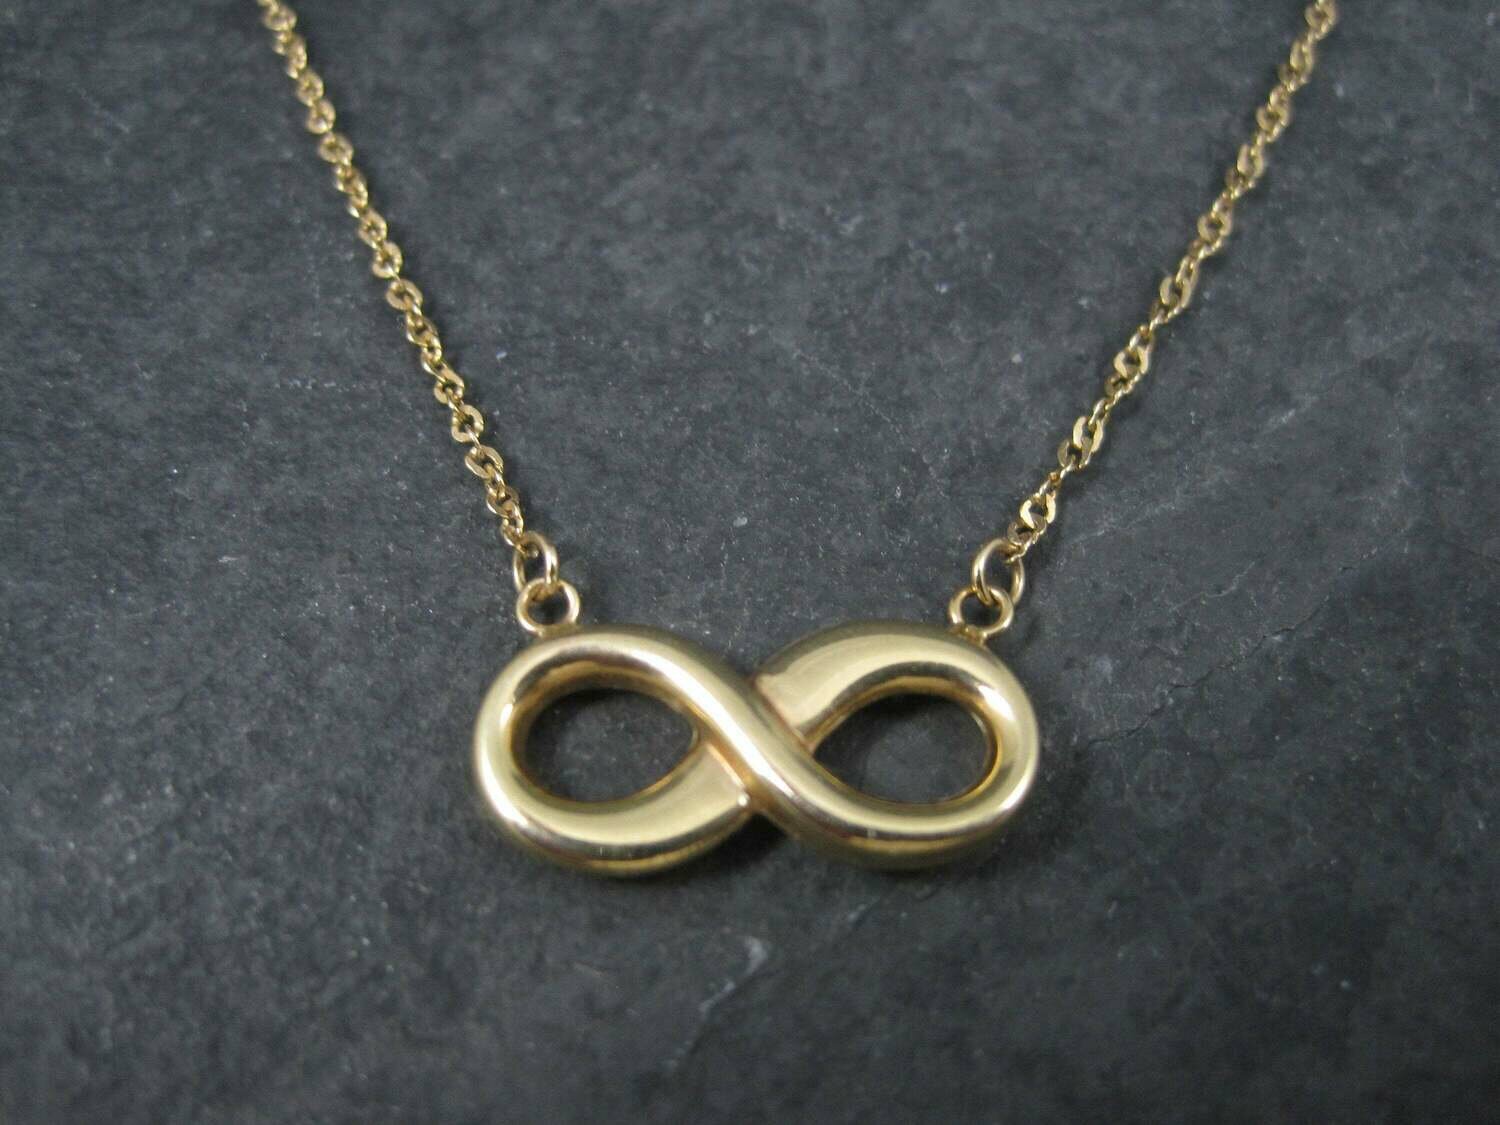 Vintage 10K Infinity Necklace 16 Inches